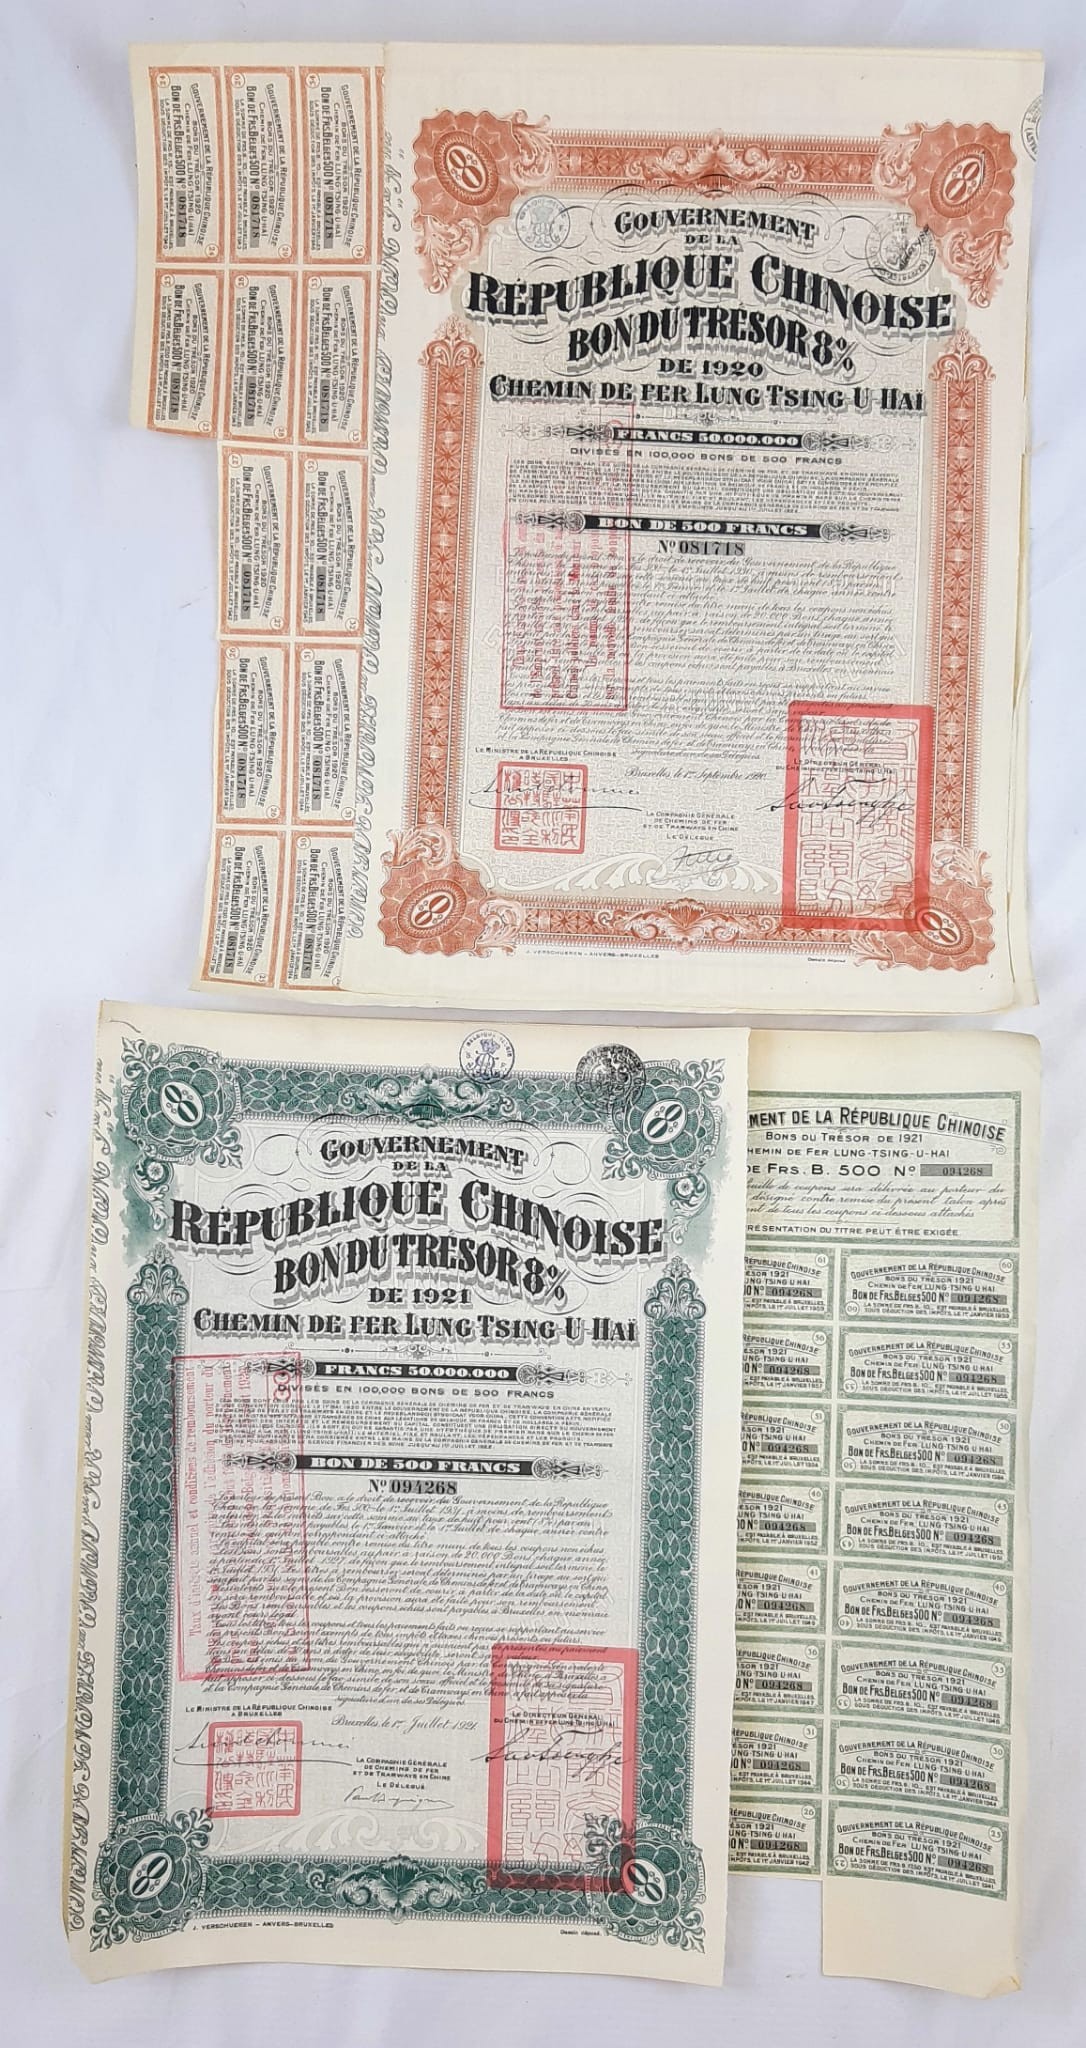 Two Antique 1920 and 1921 Republic of China Railroad Bond Certificates. Both with coupons. In good